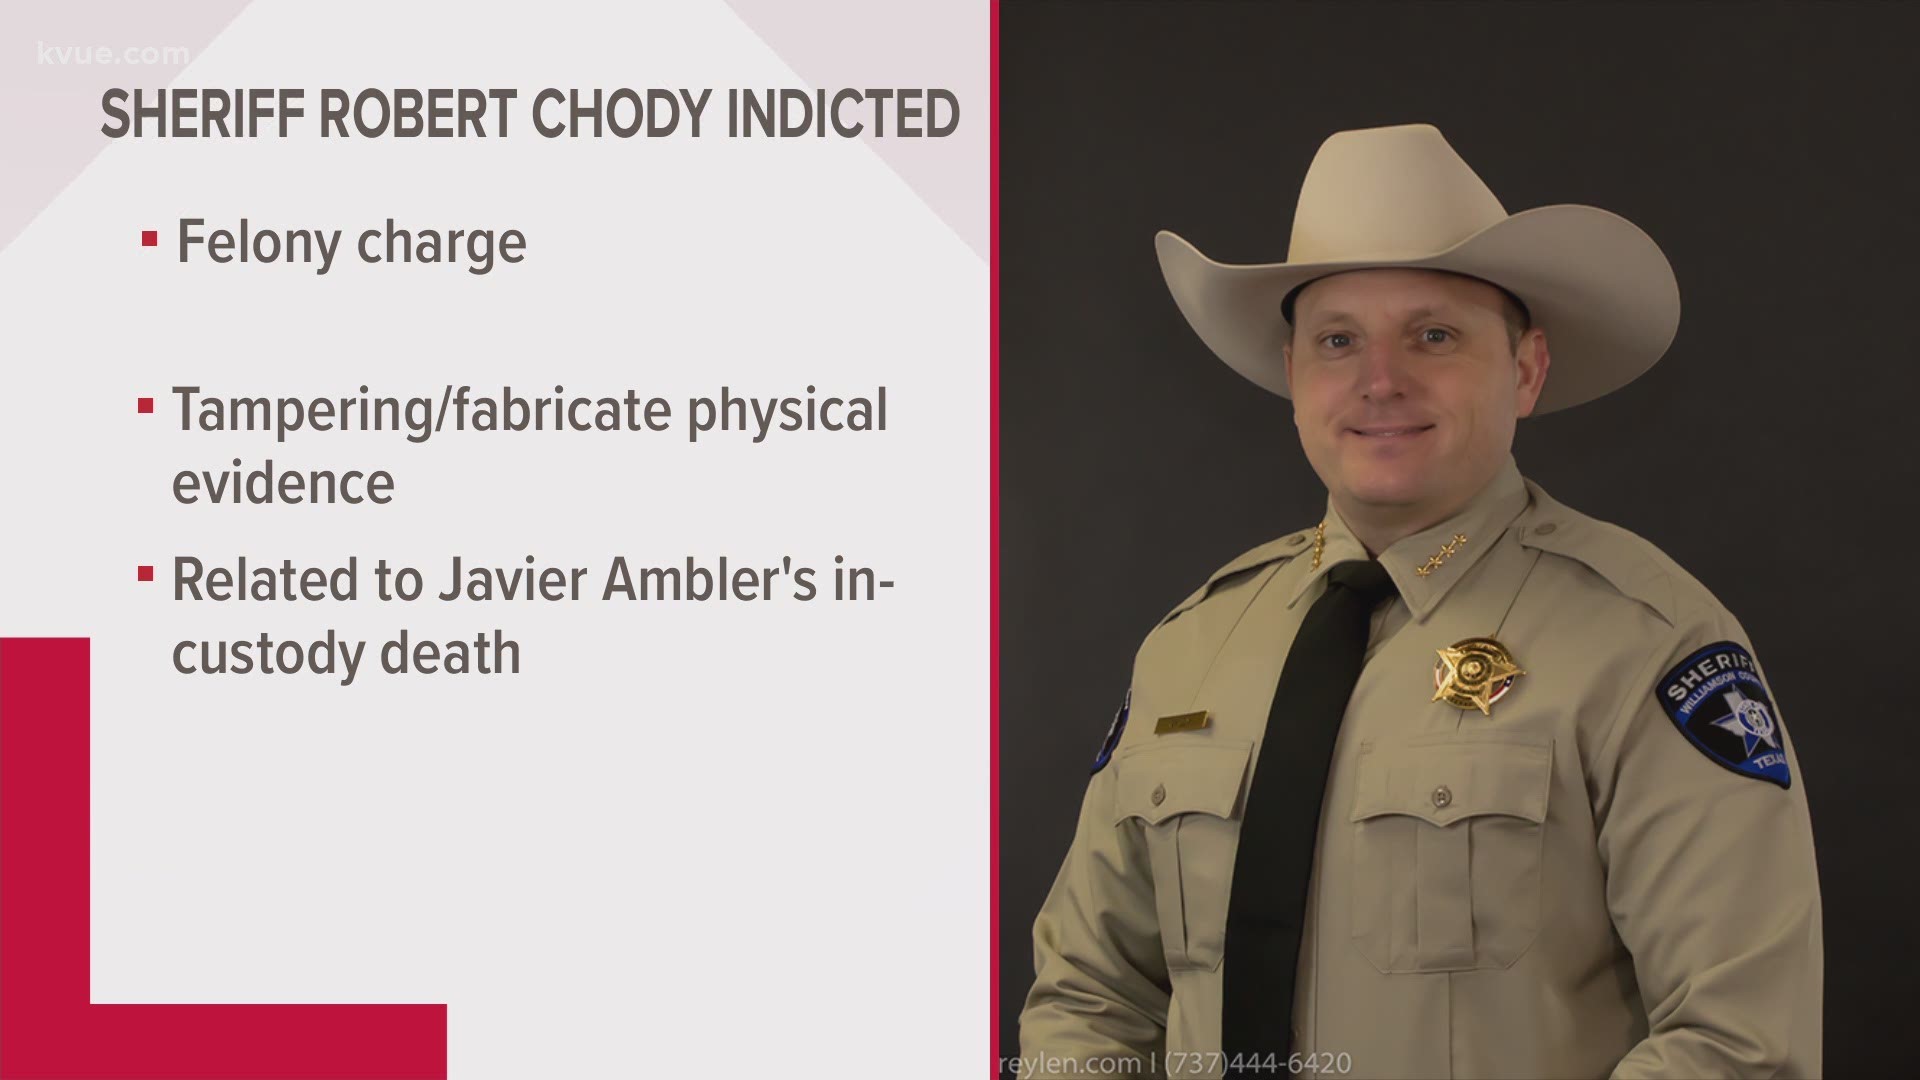 A Williamson County grand jury has indicted Sheriff Robert Chody on a charge related to the death of Javier Ambler in March 2019.